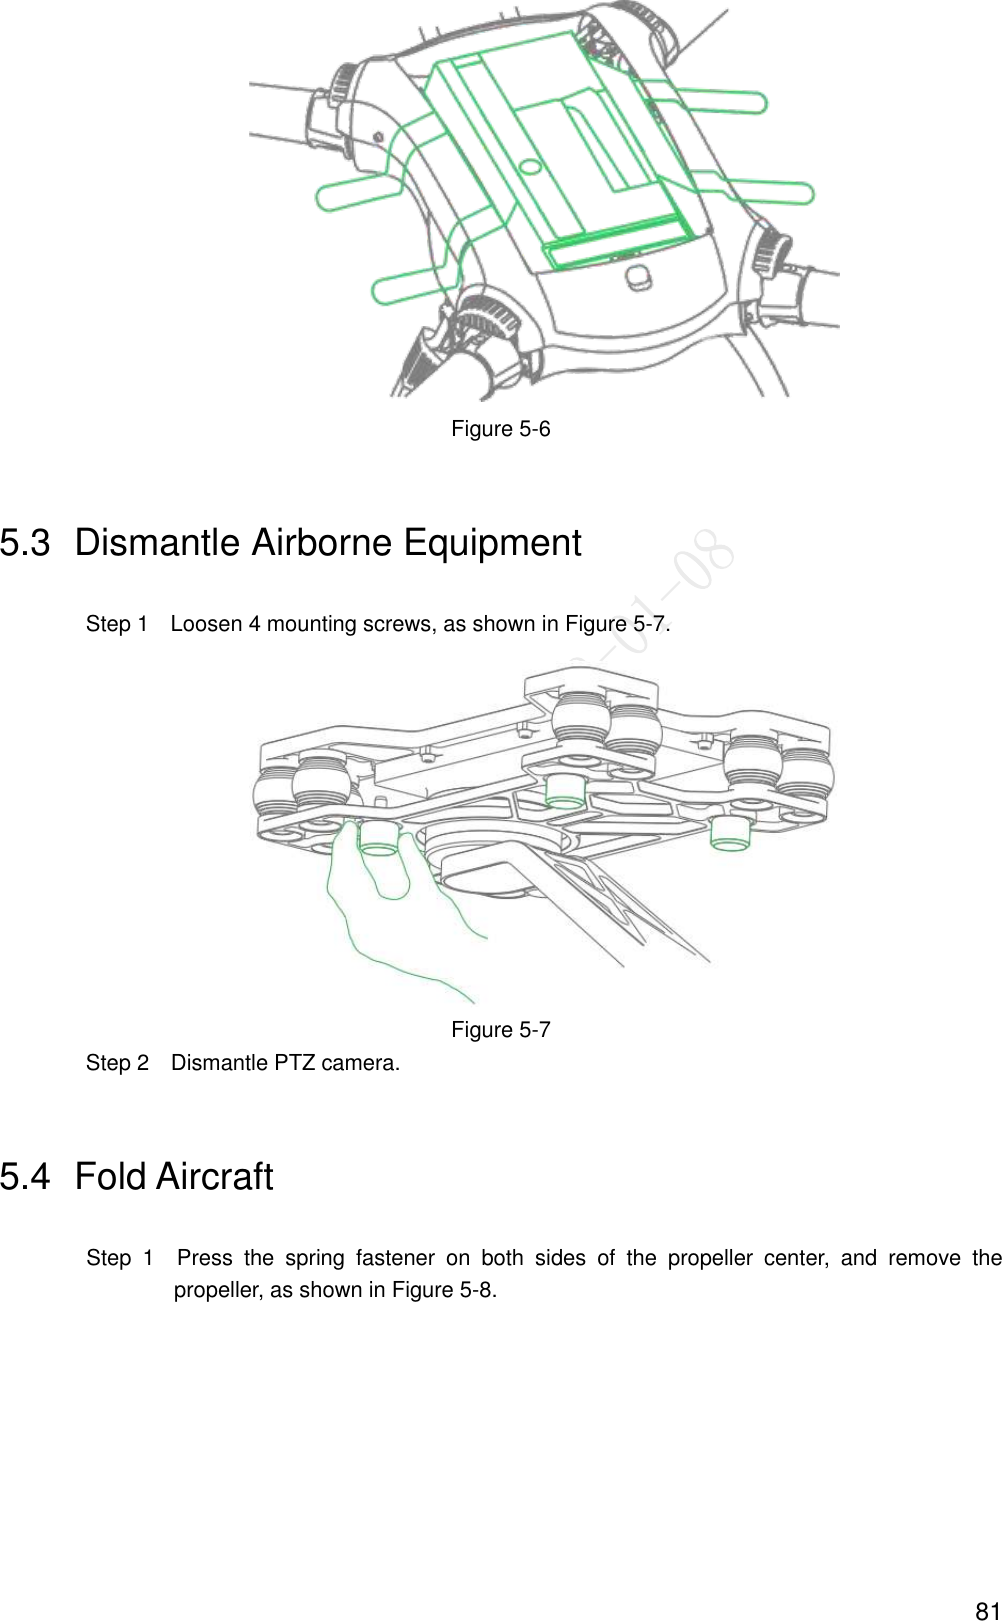  81  Figure 5-6 5.3  Dismantle Airborne Equipment Step 1    Loosen 4 mounting screws, as shown in Figure 5-7.  Figure 5-7 Step 2    Dismantle PTZ camera.   5.4  Fold Aircraft                   Step  1    Press  the  spring  fastener  on  both  sides  of  the  propeller  center,  and  remove  the propeller, as shown in Figure 5-8. 